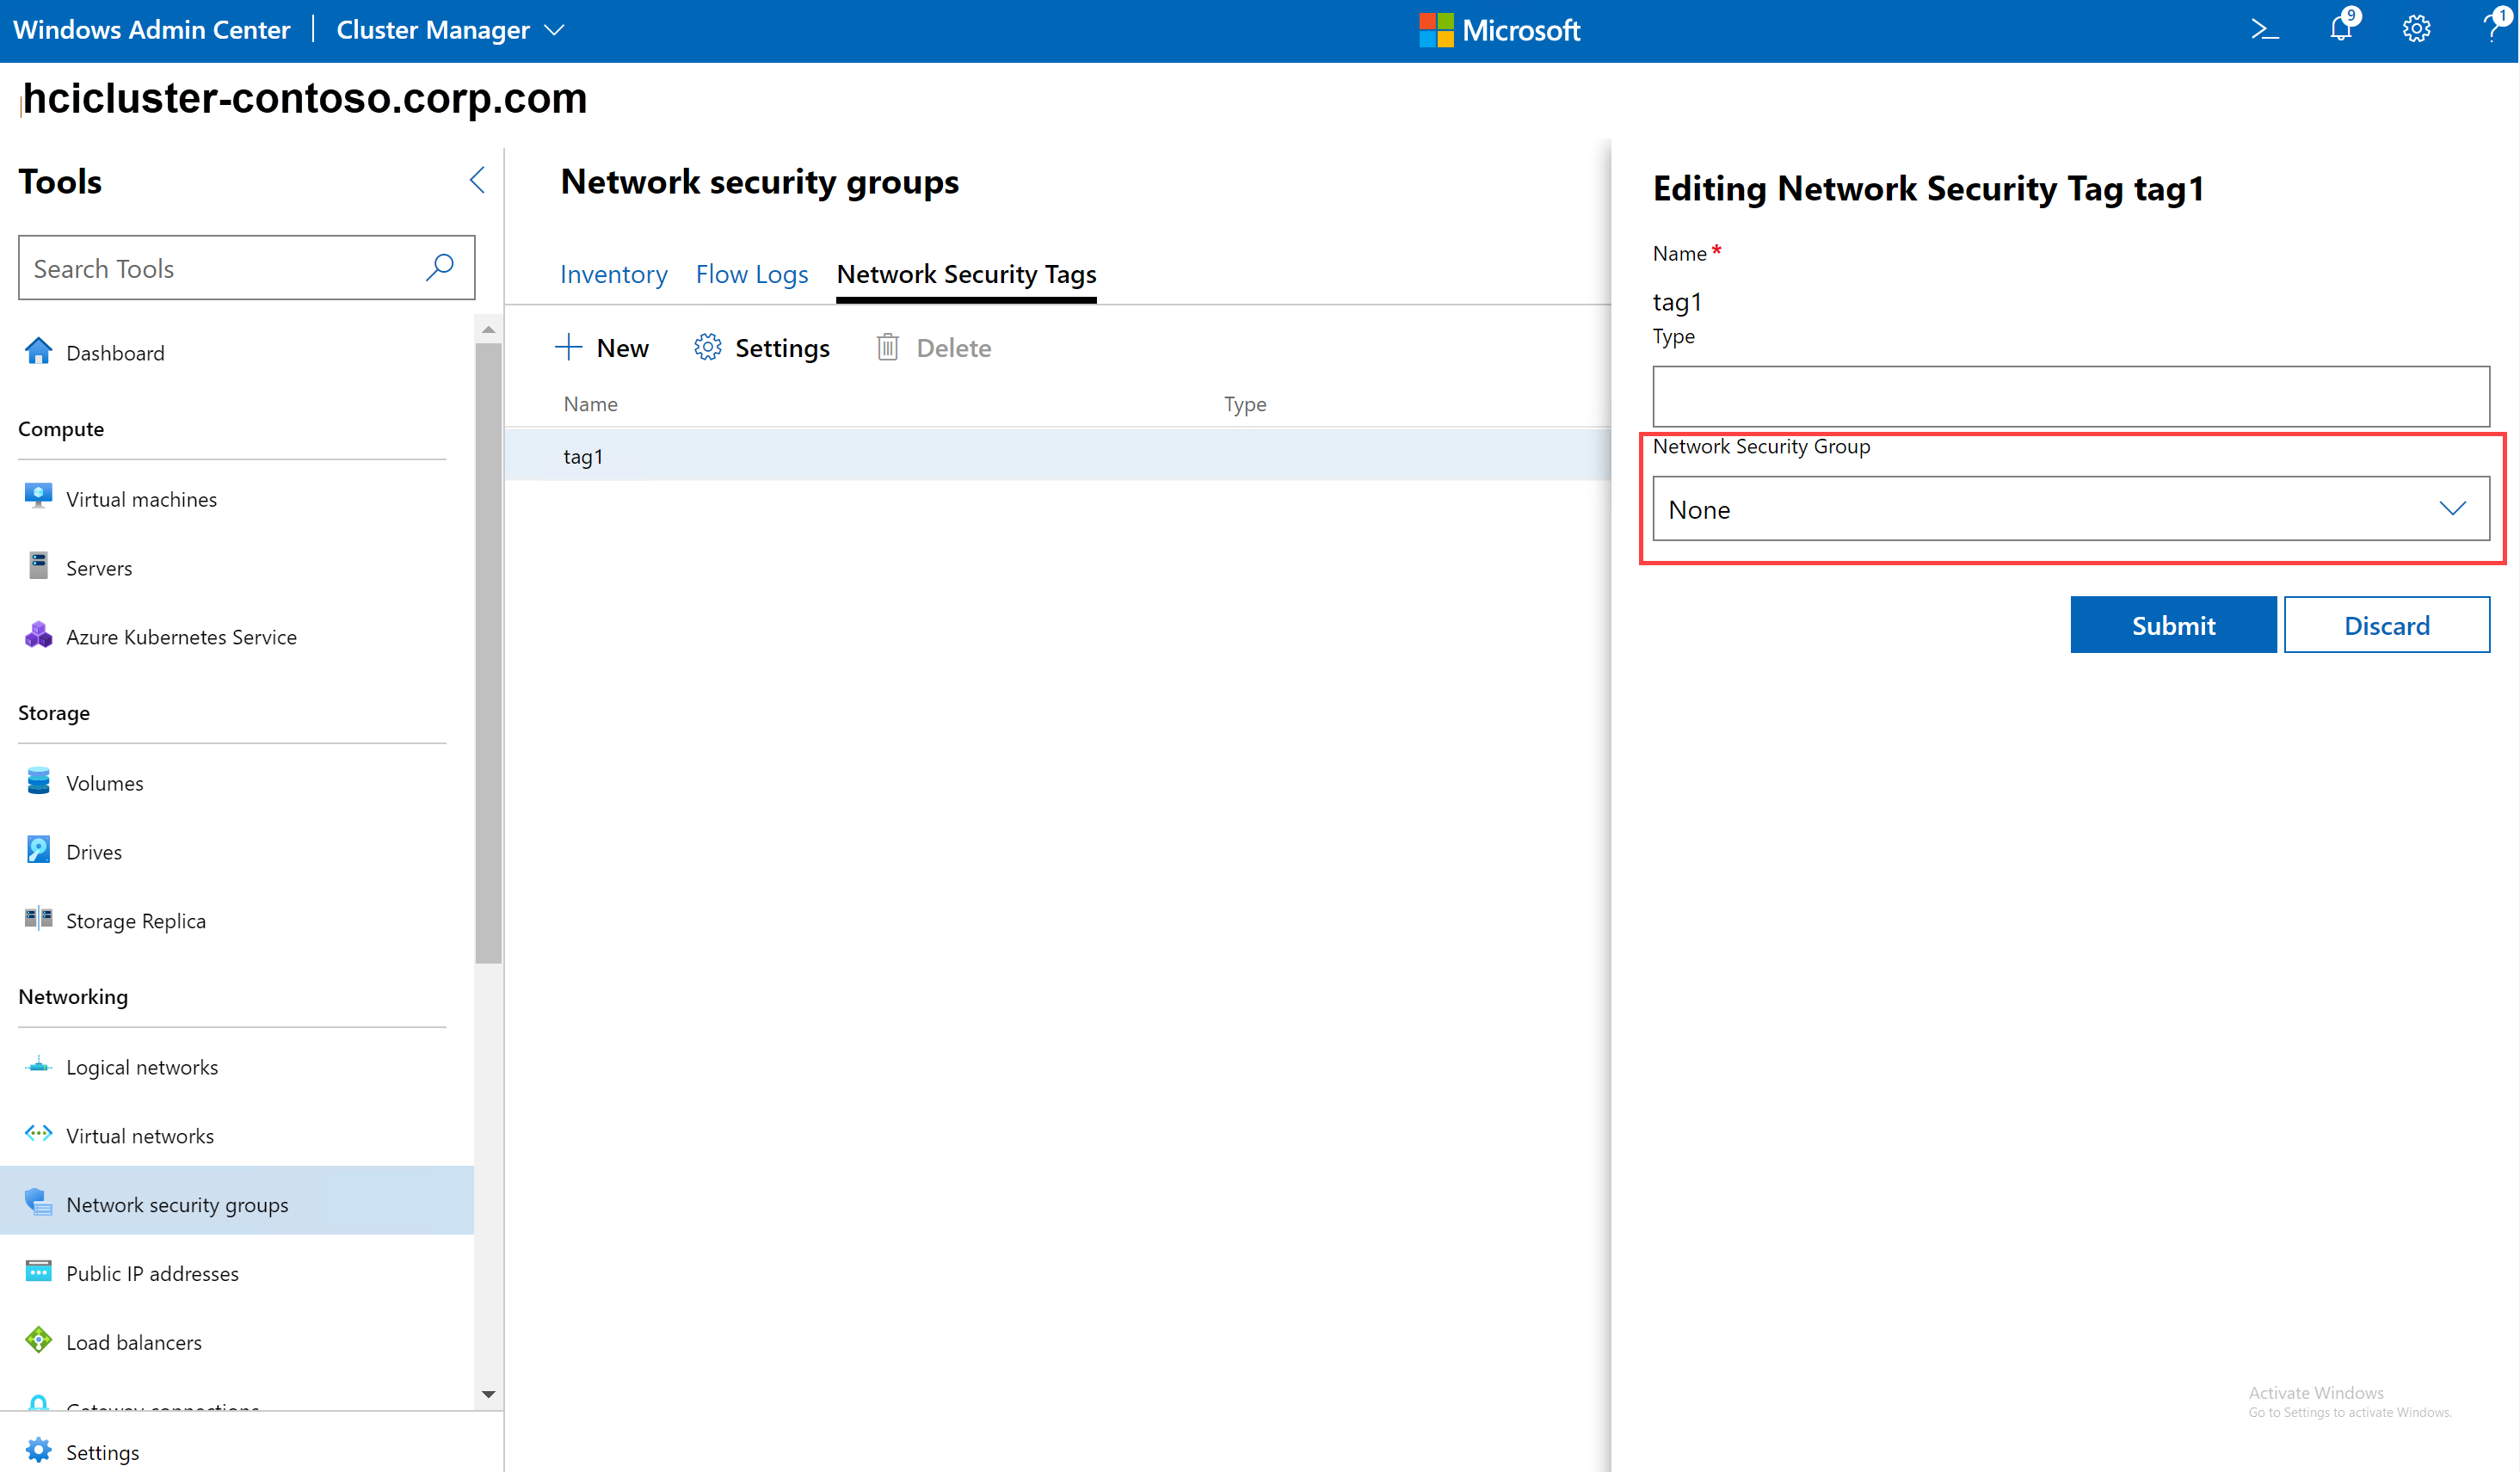 Screenshot showing how to apply an existing network security group to a network security tag.